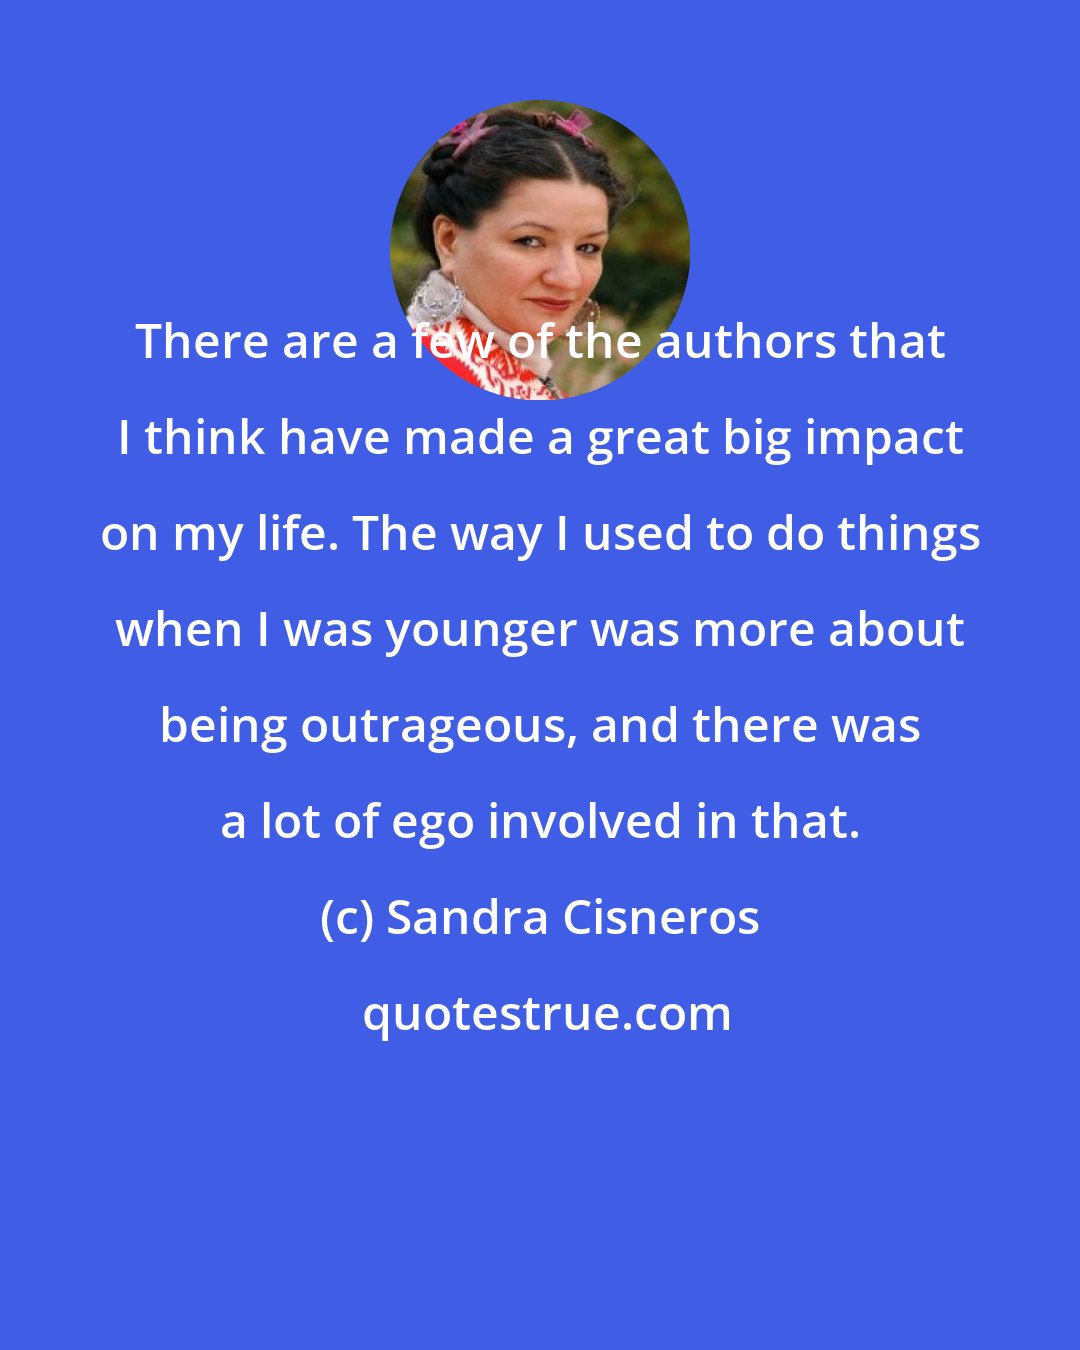 Sandra Cisneros: There are a few of the authors that I think have made a great big impact on my life. The way I used to do things when I was younger was more about being outrageous, and there was a lot of ego involved in that.